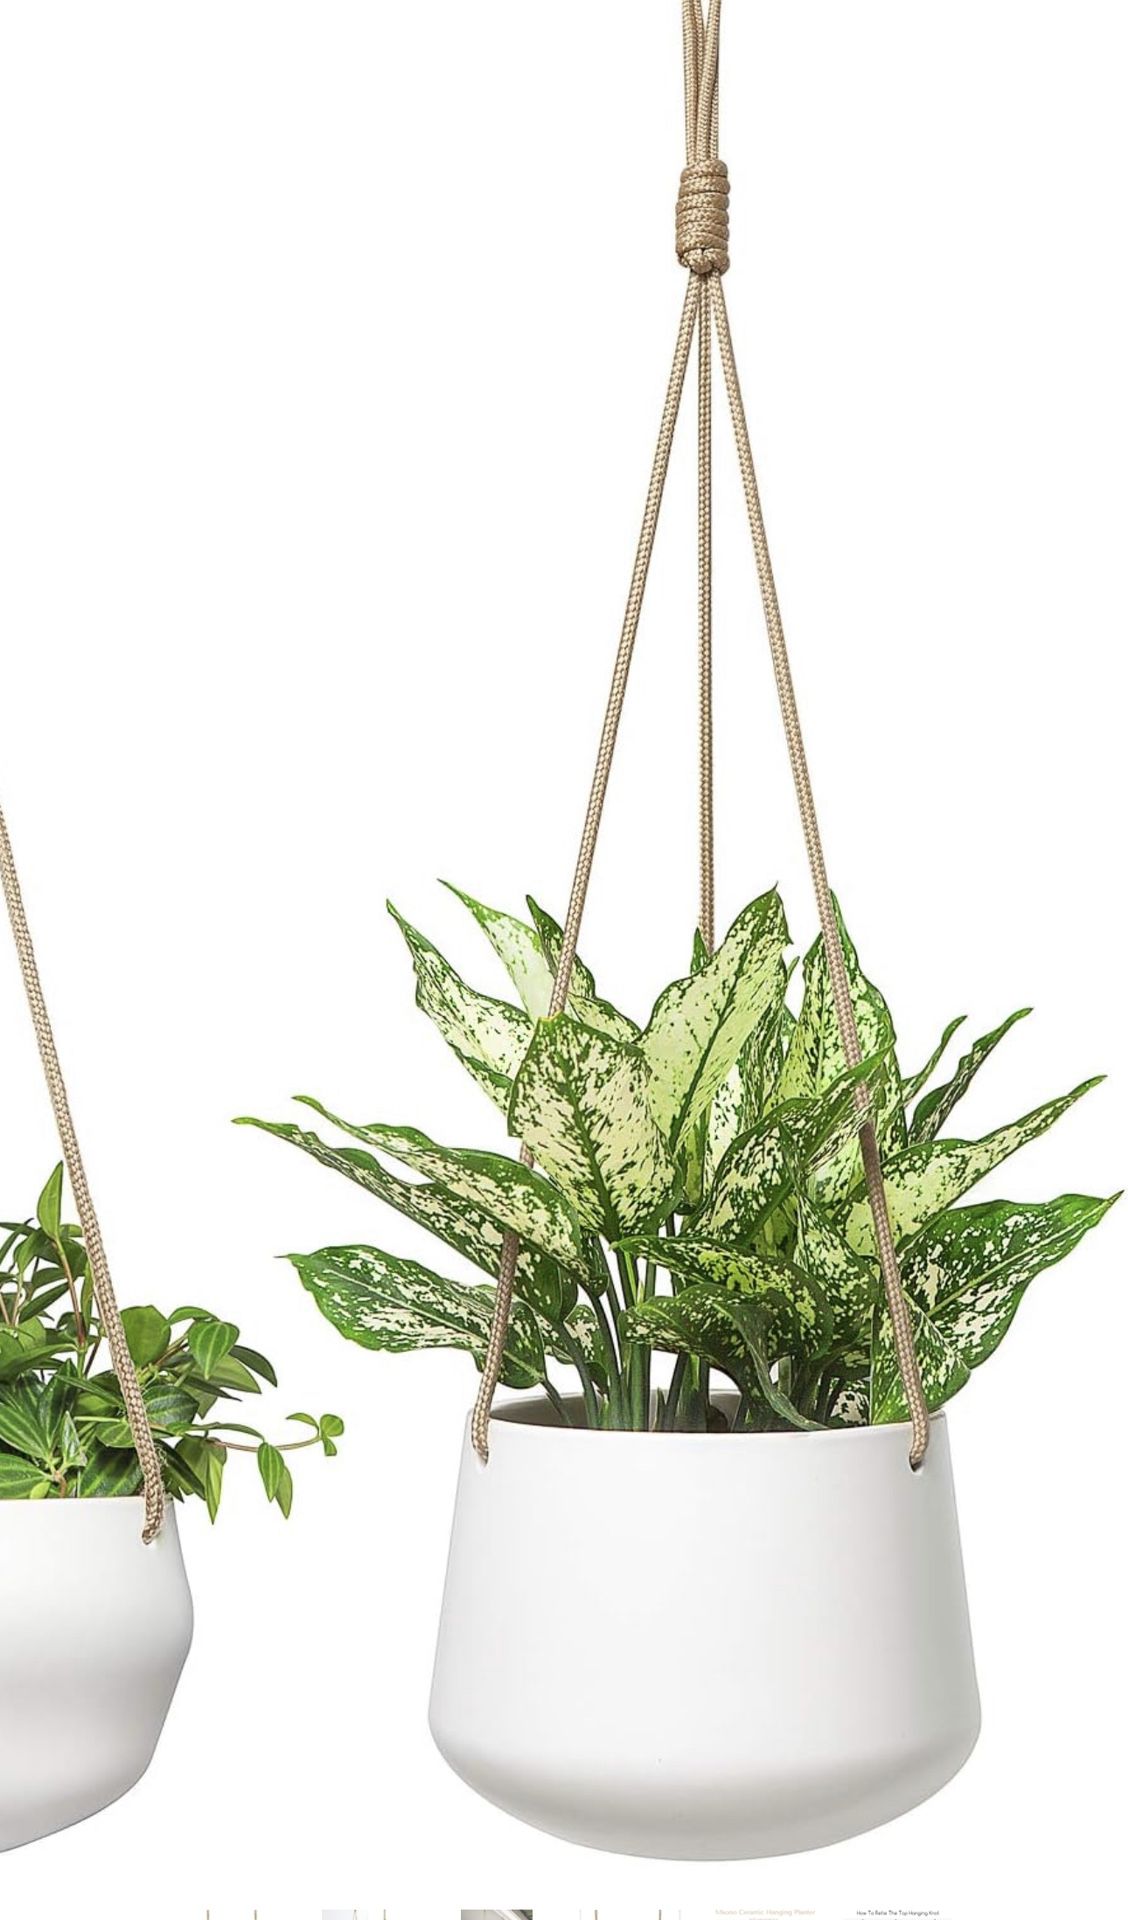 NEW Ceramic Hanging Planter of Shallow 8 Inch and Deep 6 Inch for Indoor Outdoor Plants, Modern Plant Pot Geometric Porcelain Hanging Basket with Poly